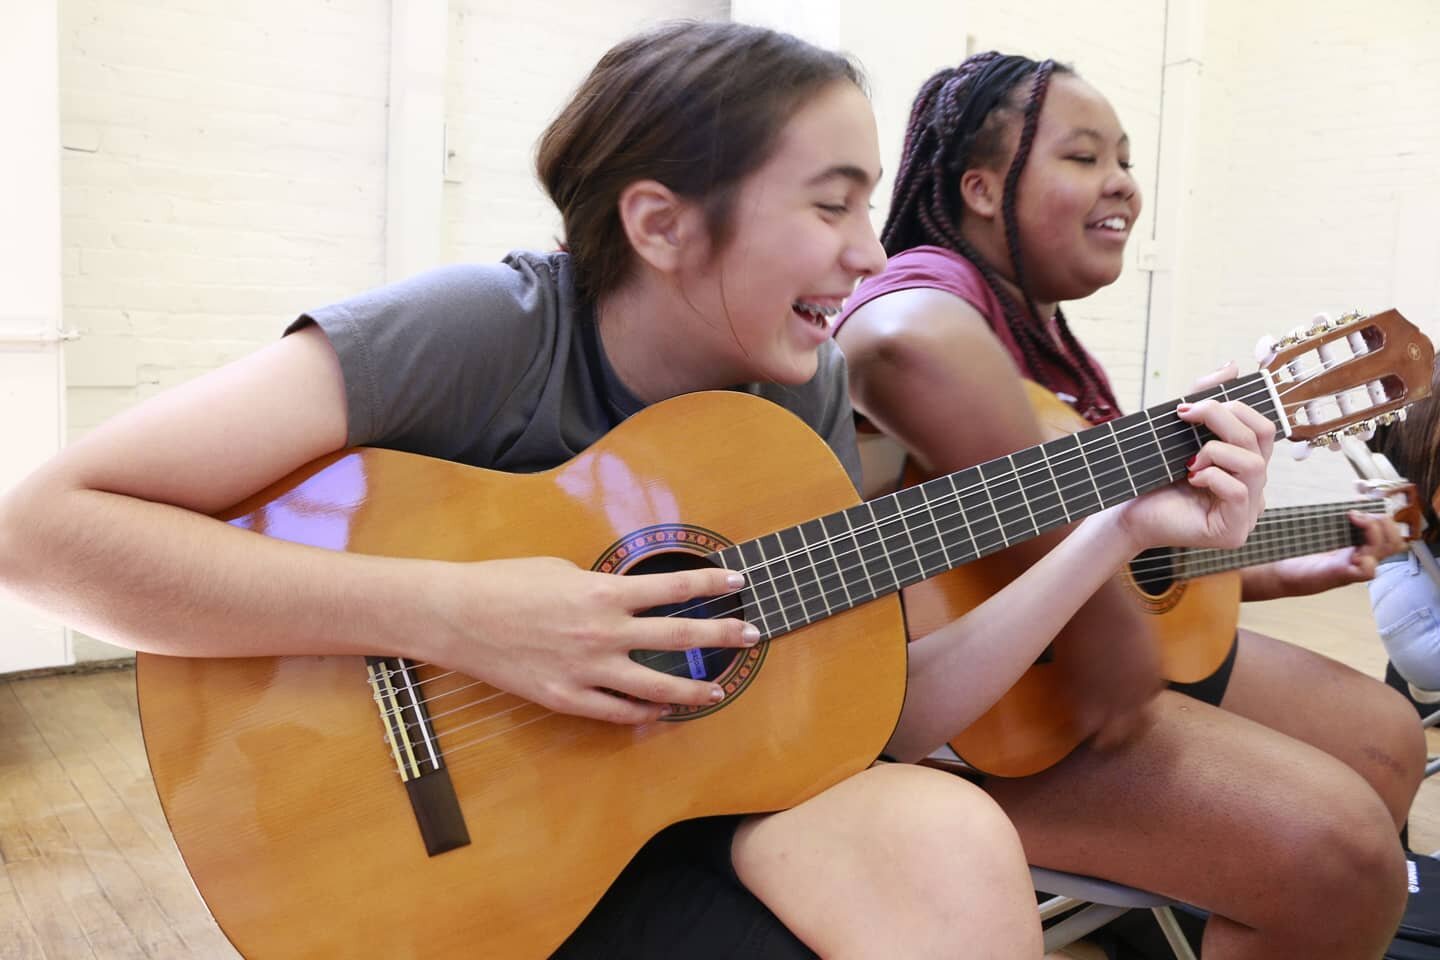 Work of Art is happy to be among the arts groups that are in residence at CLARA. @claramidtown Their Performing Arts Summer Camp uses interactive music, theatre, and dance programming to boost your child&rsquo;s confidence and personal pride through 